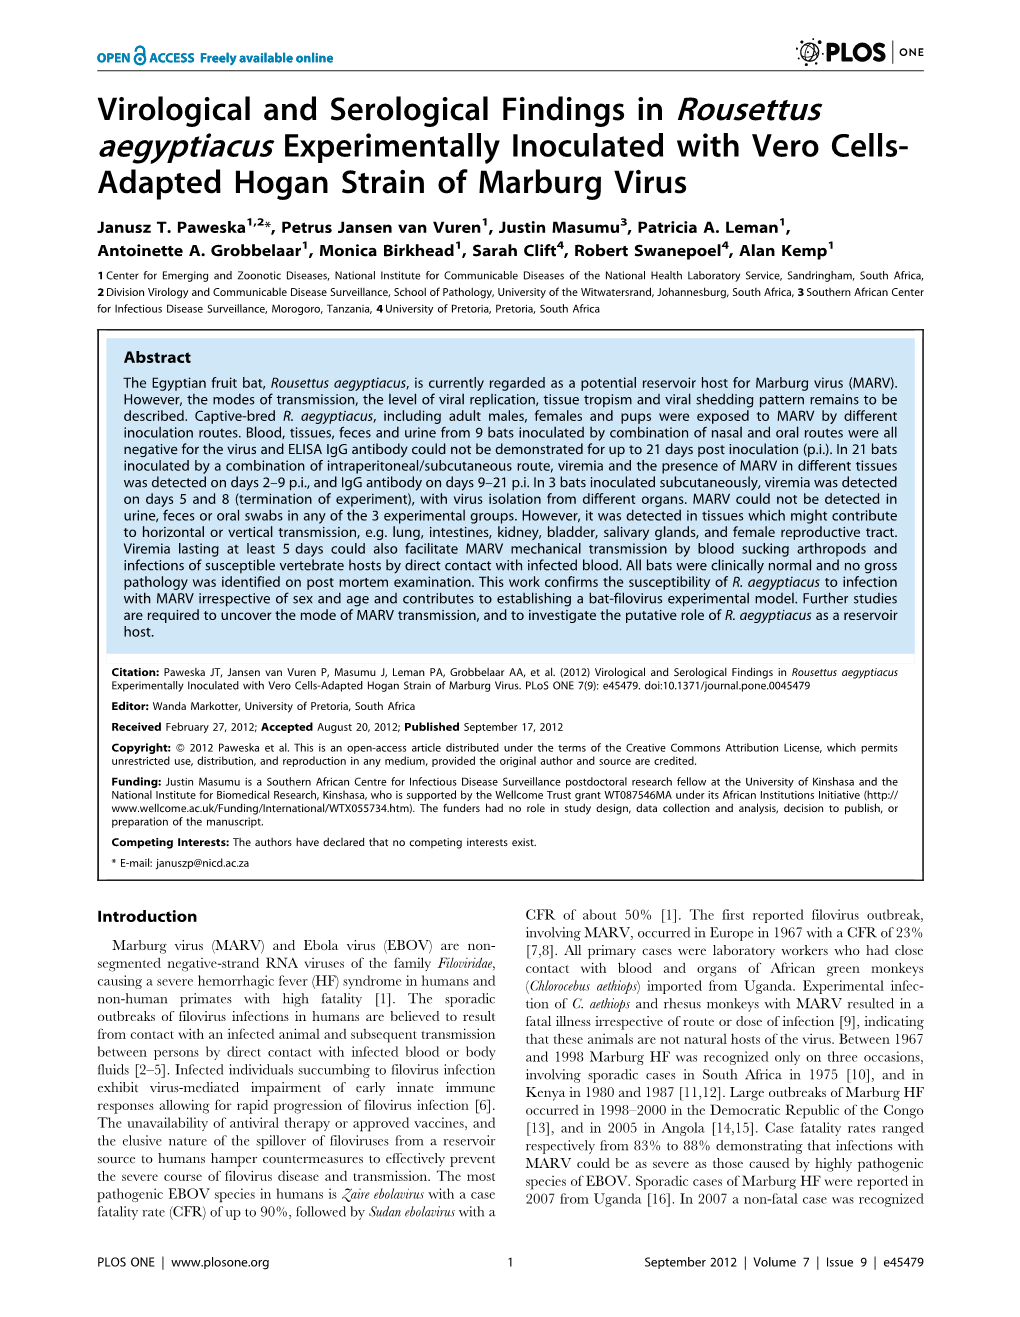 Virological and Serological Findings in Rousettus Aegyptiacus Experimentally Inoculated with Vero Cells- Adapted Hogan Strain of Marburg Virus